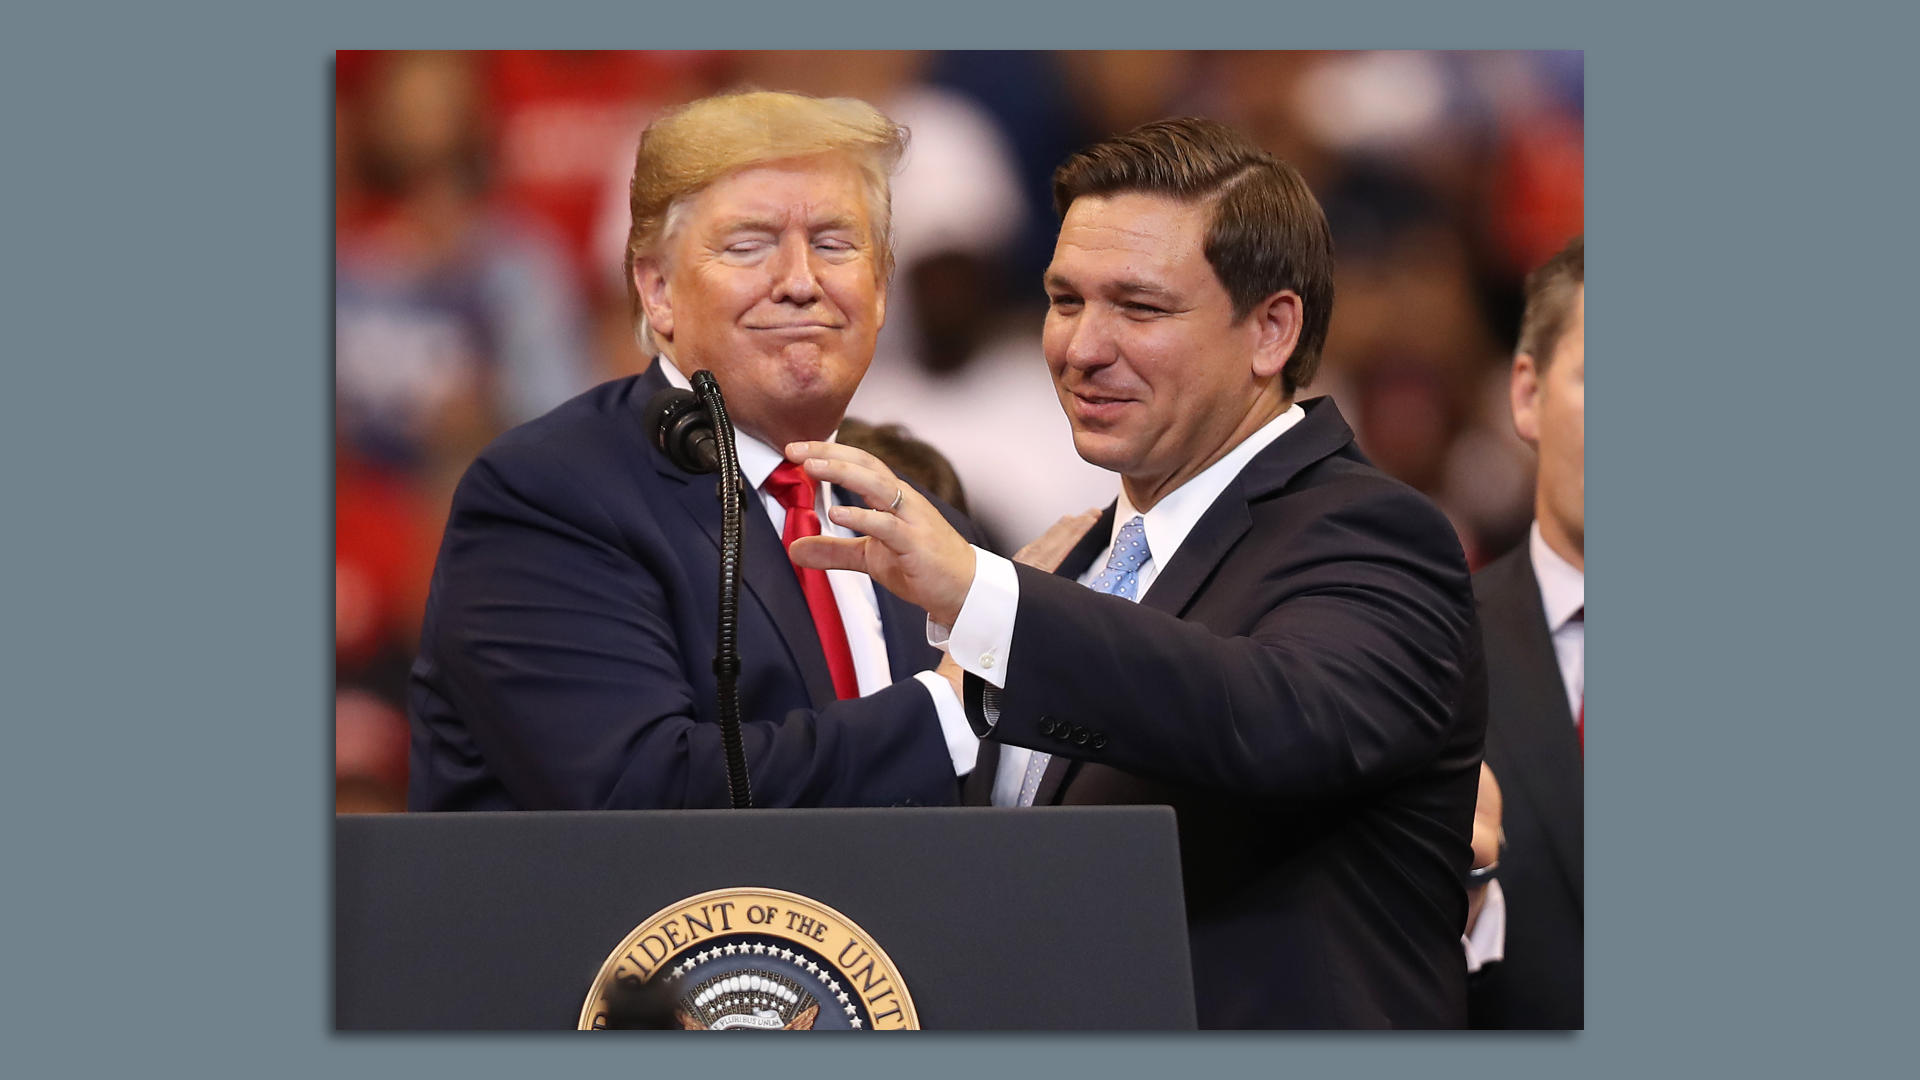 SUNRISE, FLORIDA - NOVEMBER 26: U.S. President Donald Trump introduces Florida Governor Ron DeSantis during a homecoming campaign rally at the BB&T Center on November 26, 2019 in Sunrise, Florida. President Trump continues to campaign for re-election in the 2020 presidential race. 